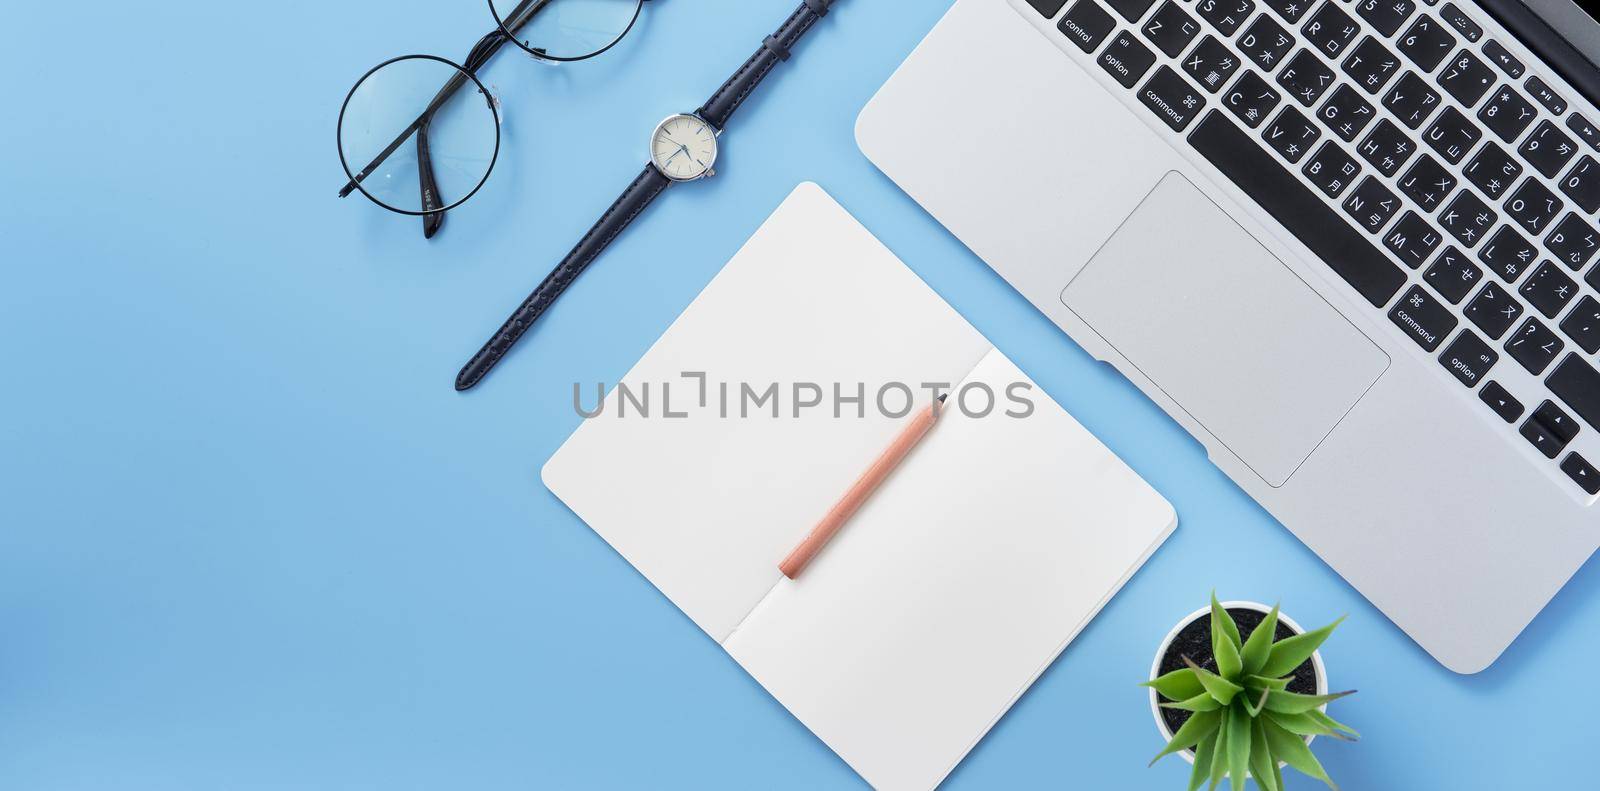 Girl write on open white book or accounting on a minimal clean light blue desk with laptop and accessories, copy space, flat lay, top view, mock up by ROMIXIMAGE